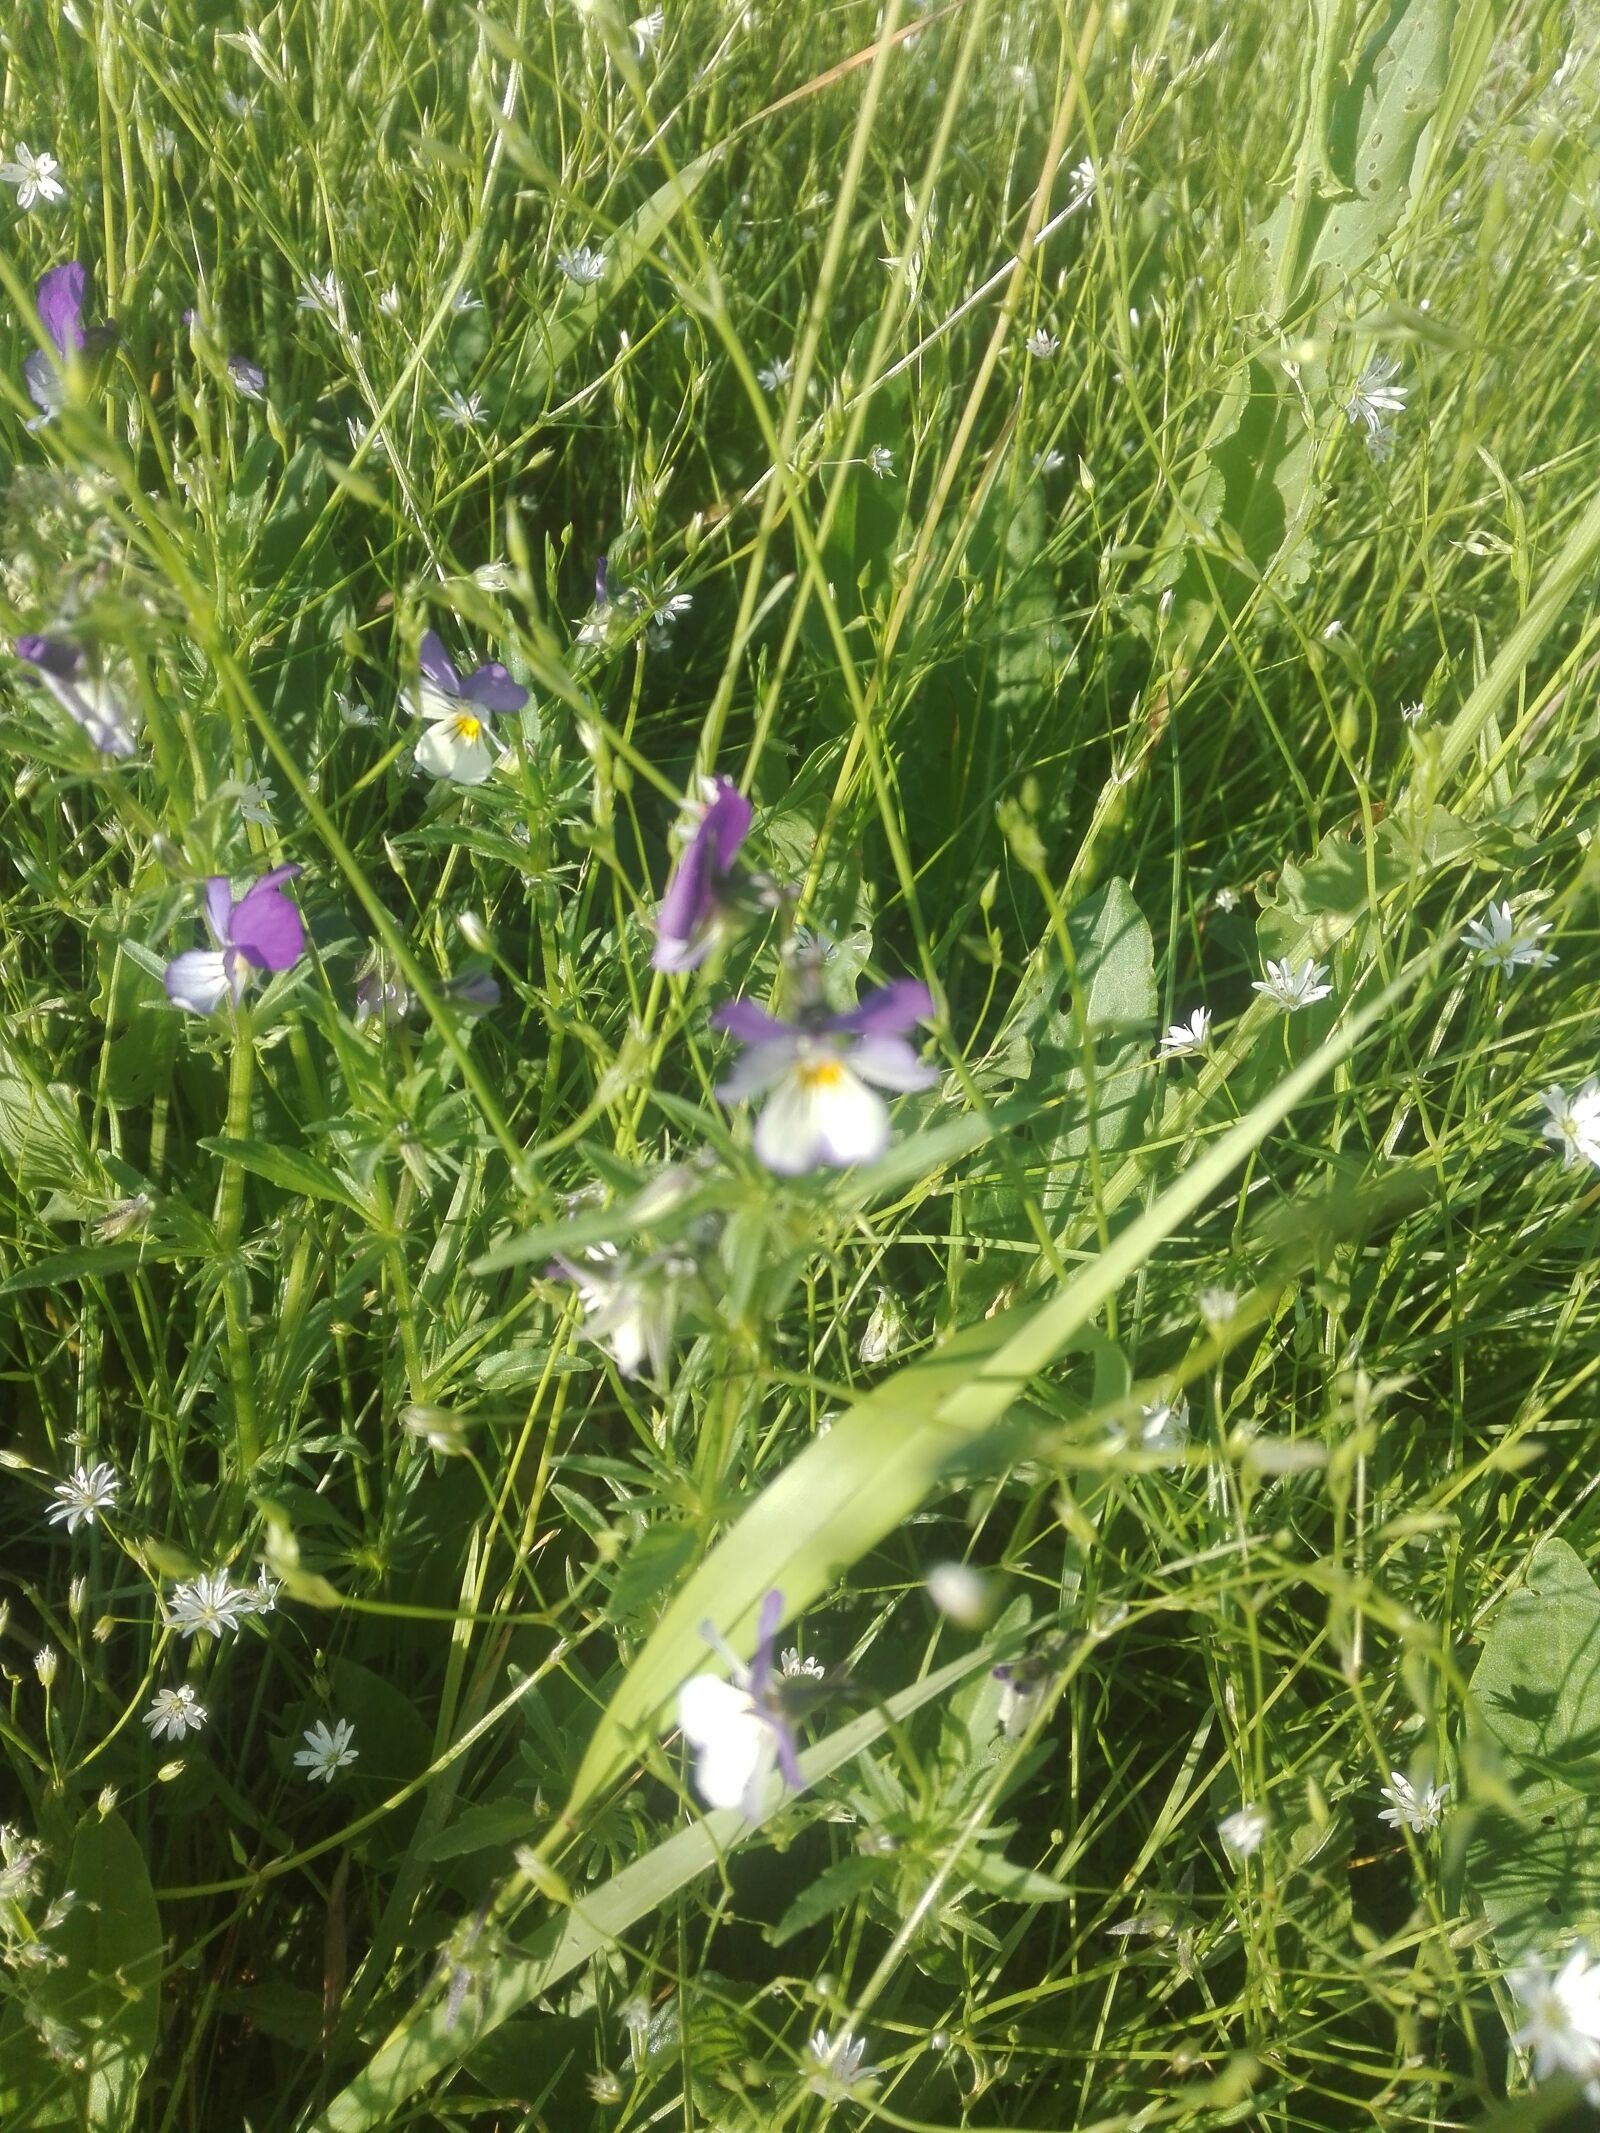 HUAWEI P8 Lite sample photo. Meadow, flowers, spring photography